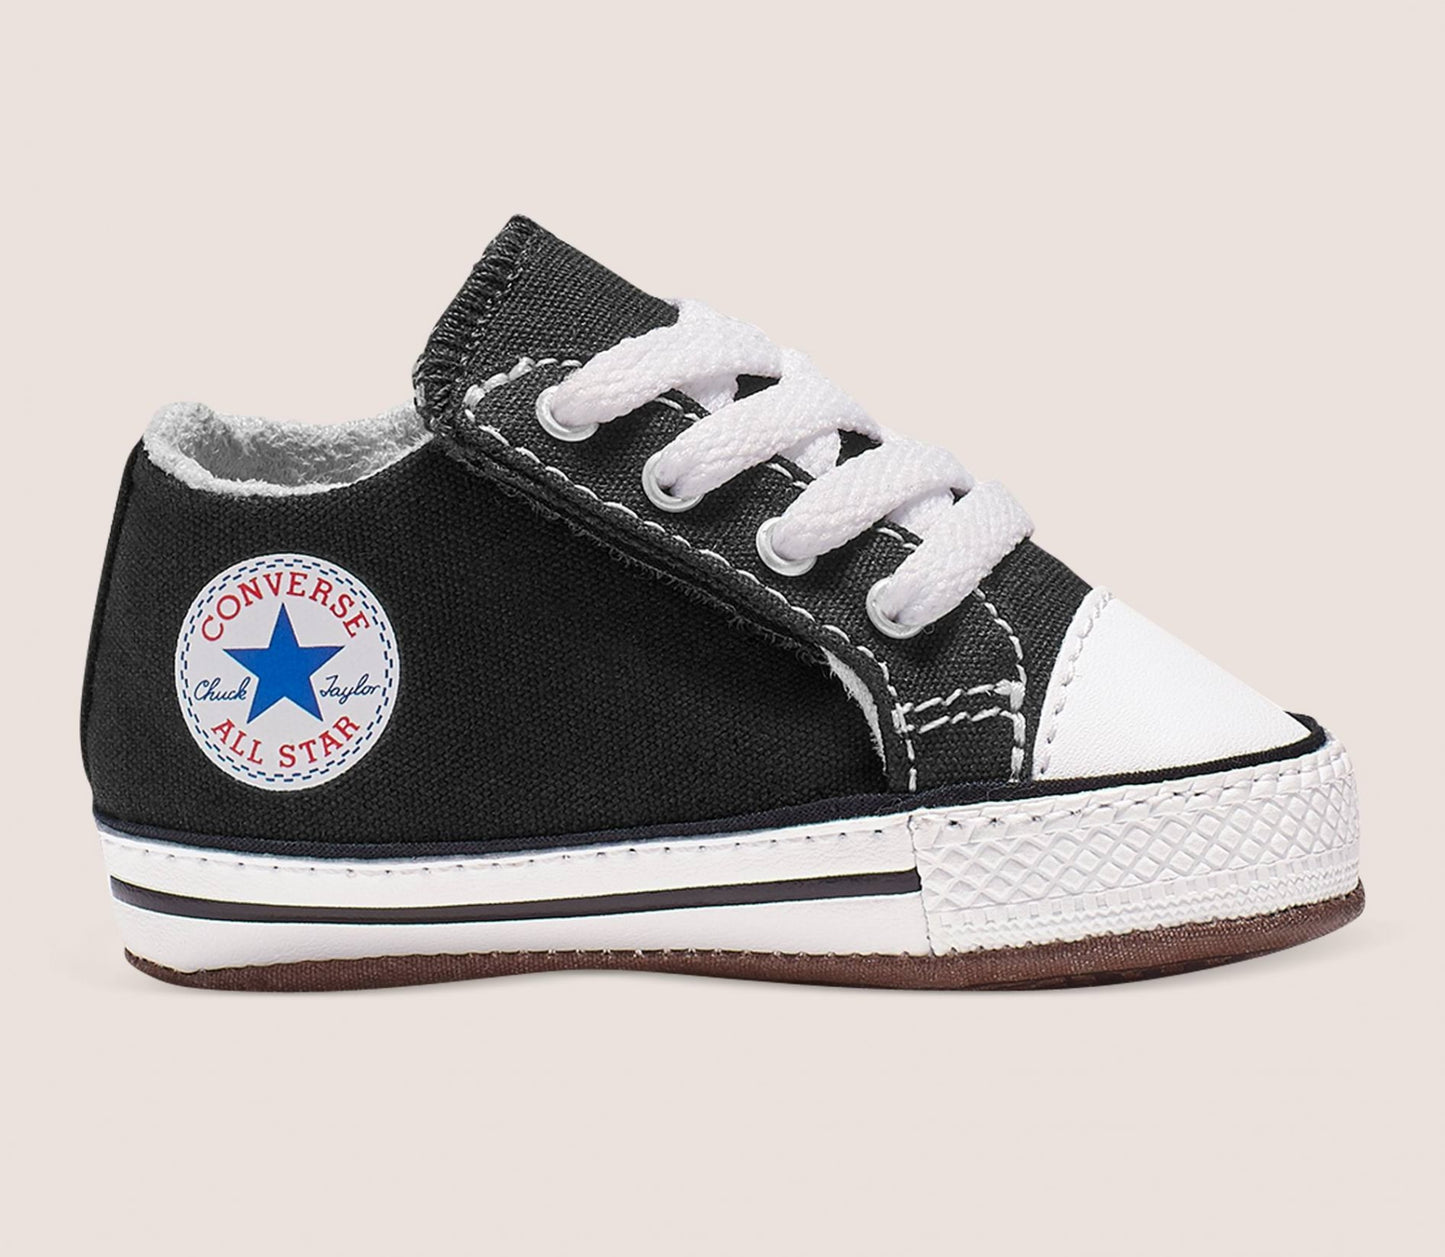 CONVERSE Chuck Taylor All Star Cribster Baby Mid Shoe - Black - VENUE.